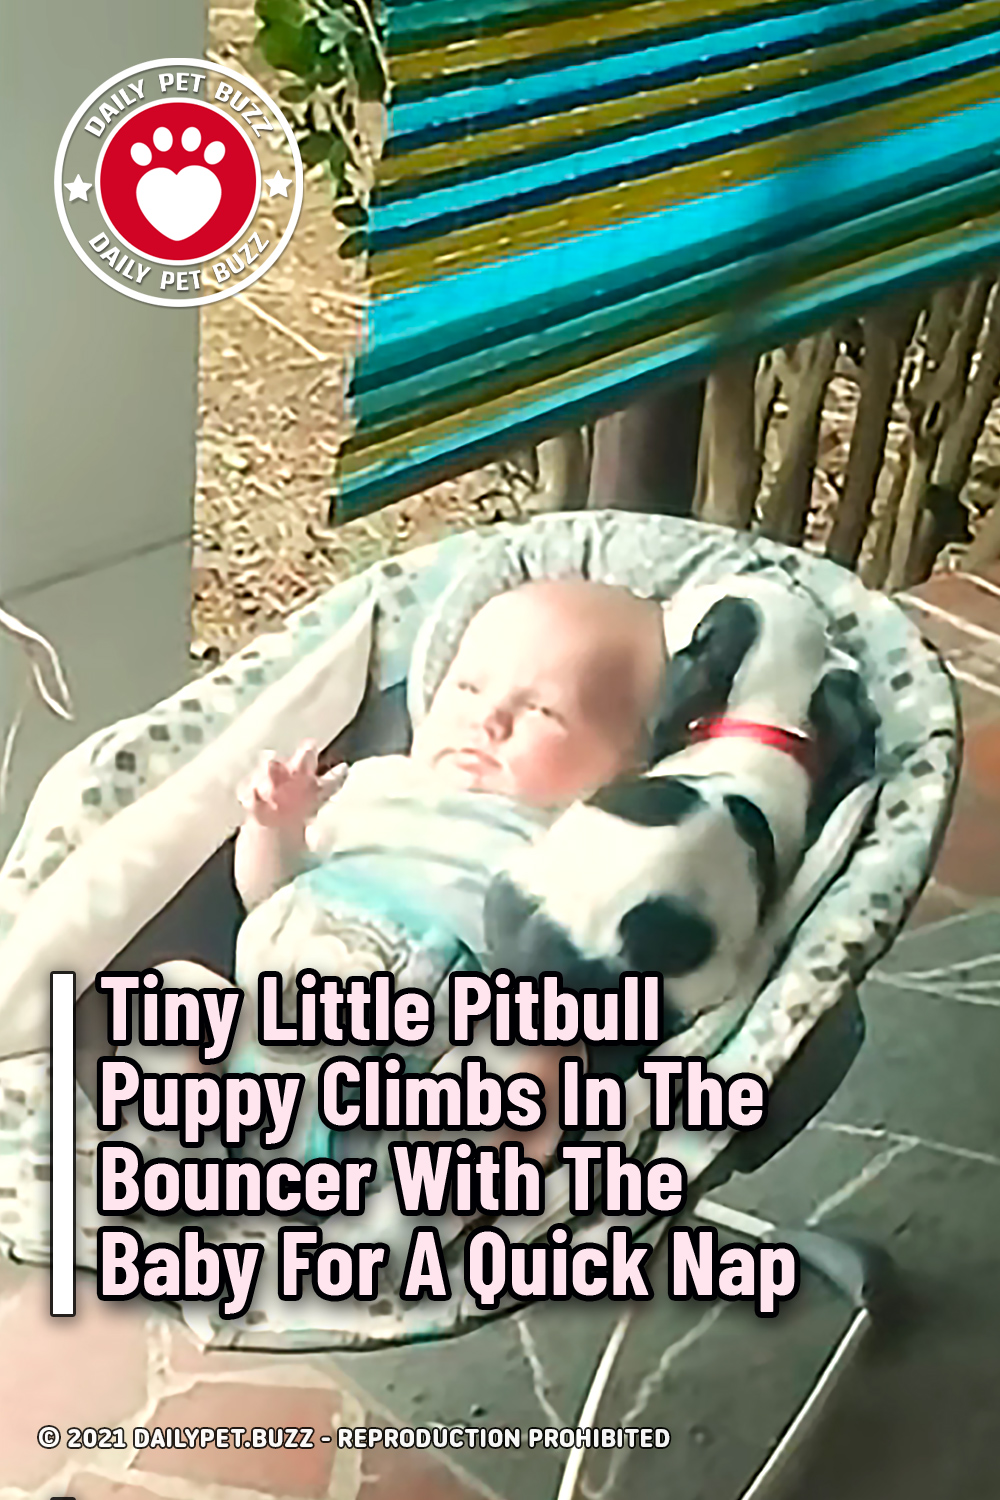 Tiny Little Pitbull Puppy Climbs In The Bouncer With The Baby For A Quick Nap